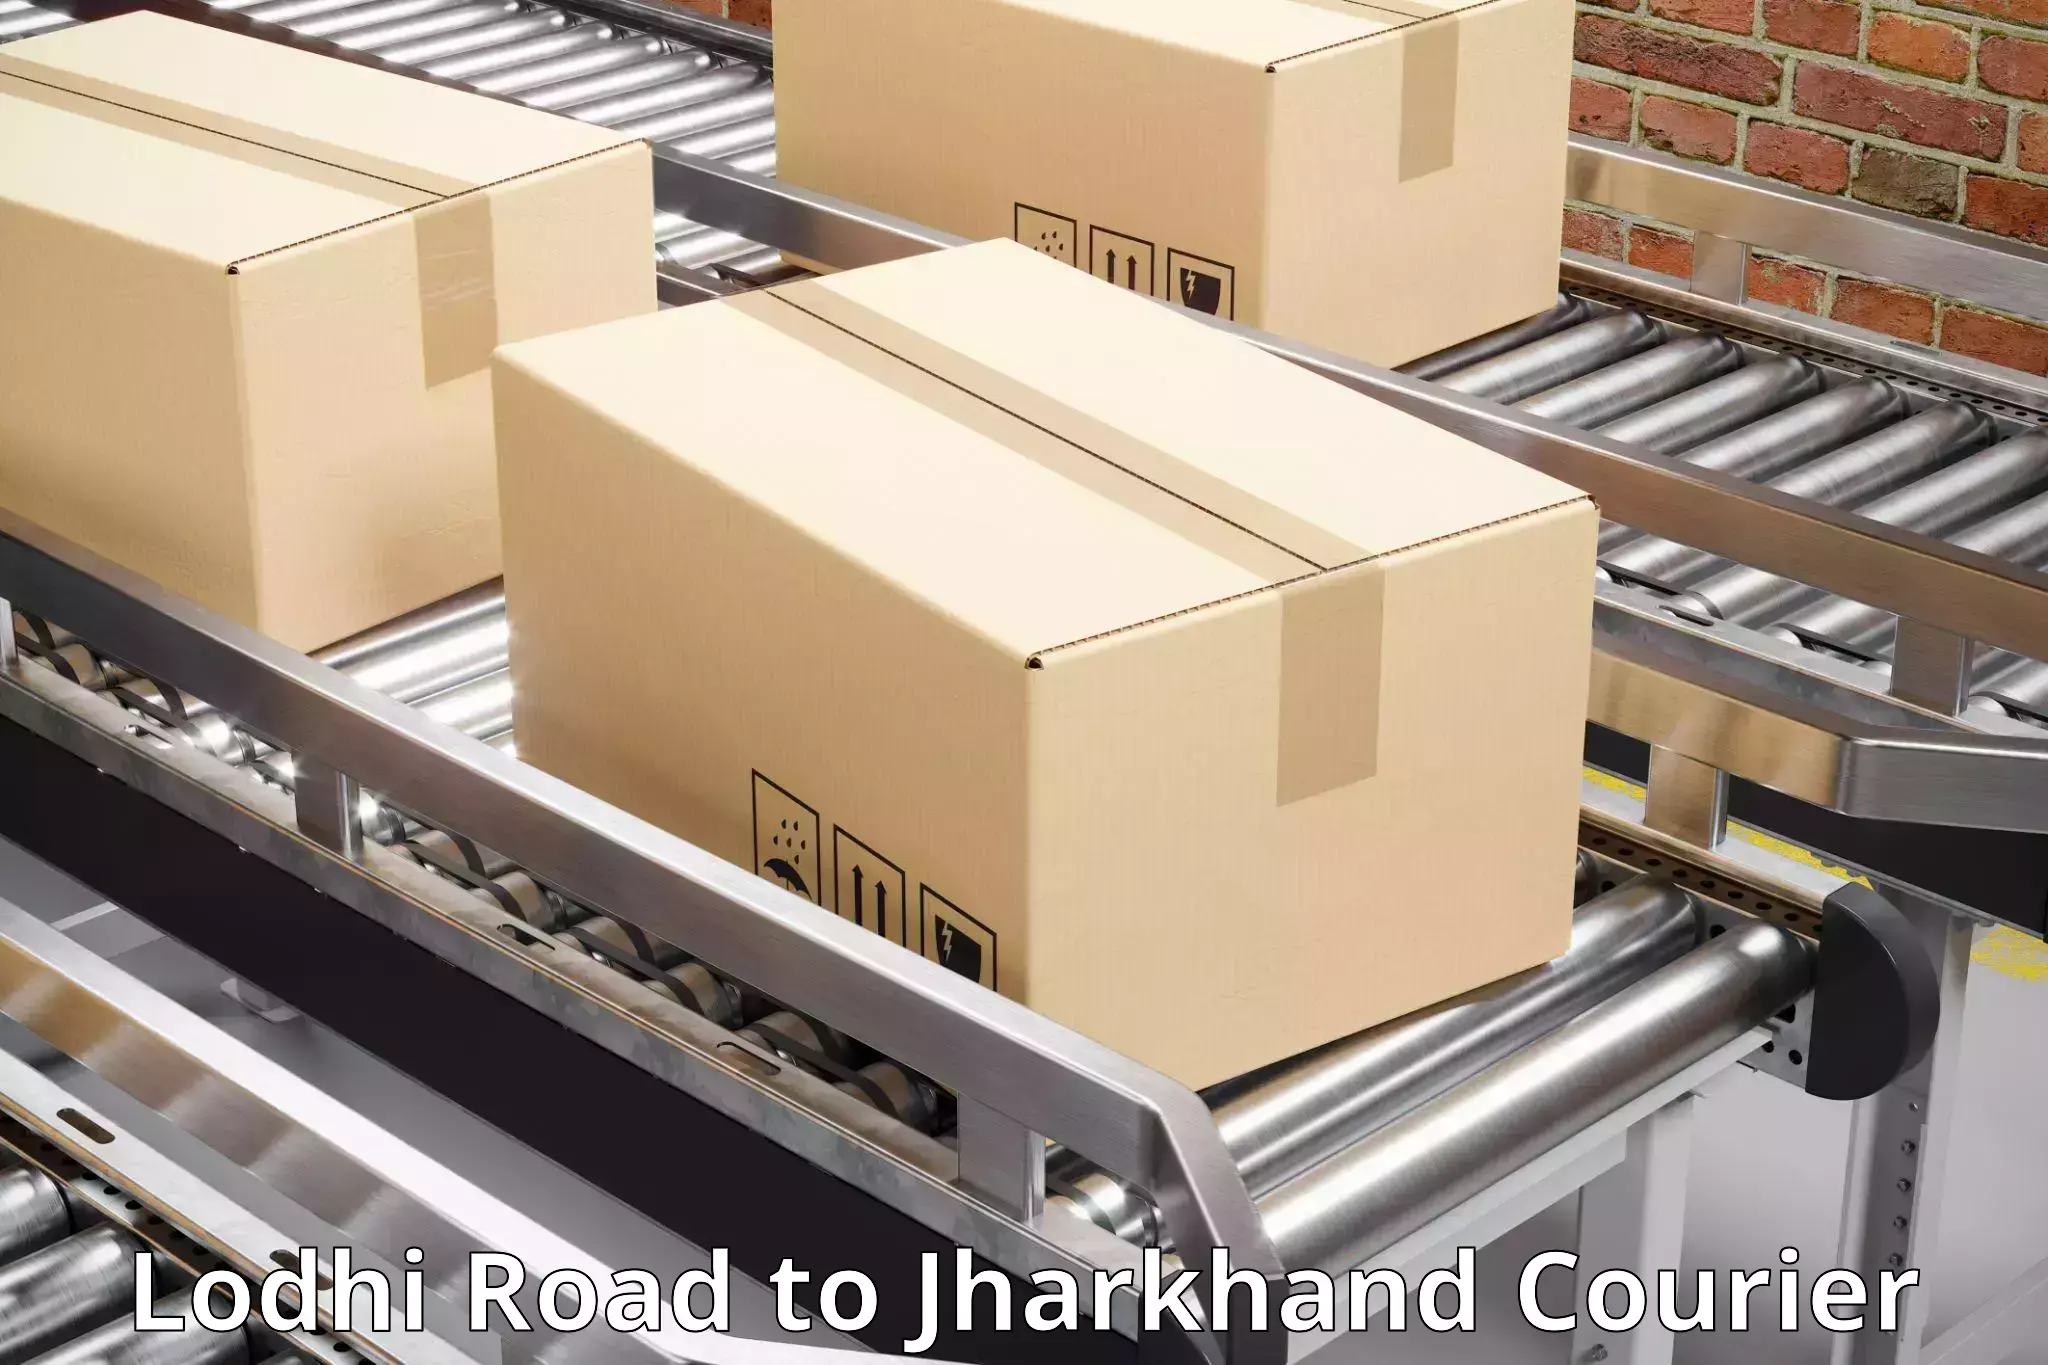 Automated parcel services Lodhi Road to Balumath